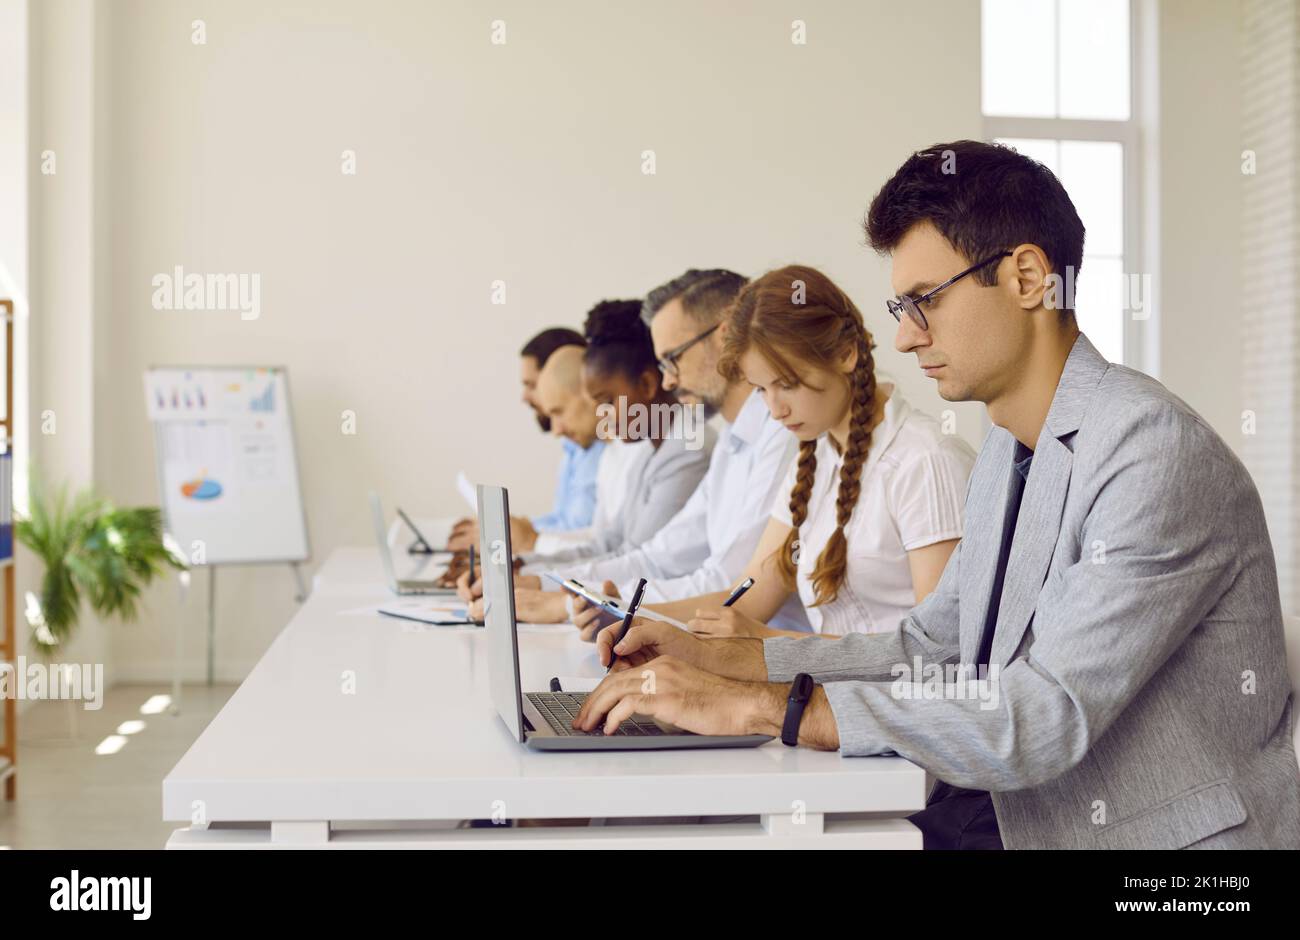 Group of business people or corporate employees working in modern office workplace Stock Photo